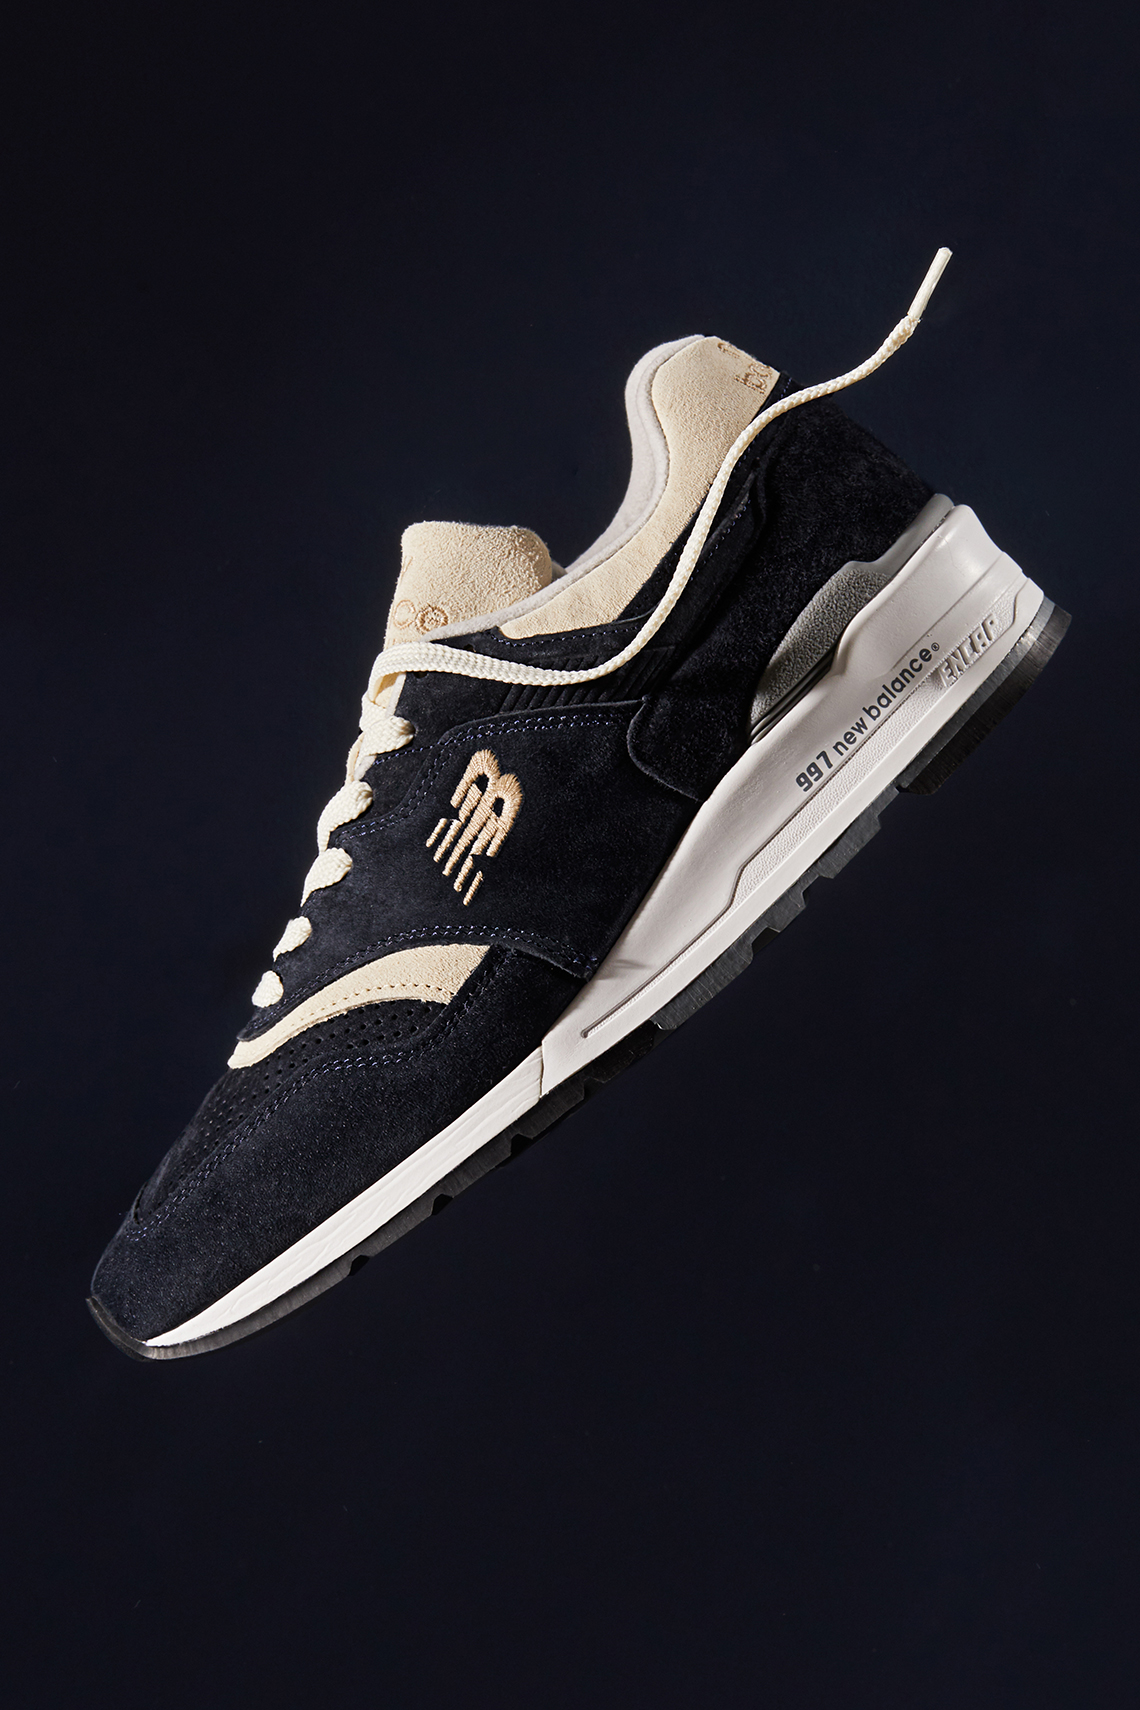 Todd Snyder New Balance Fortitech MT11139AG Triborough Navy 3